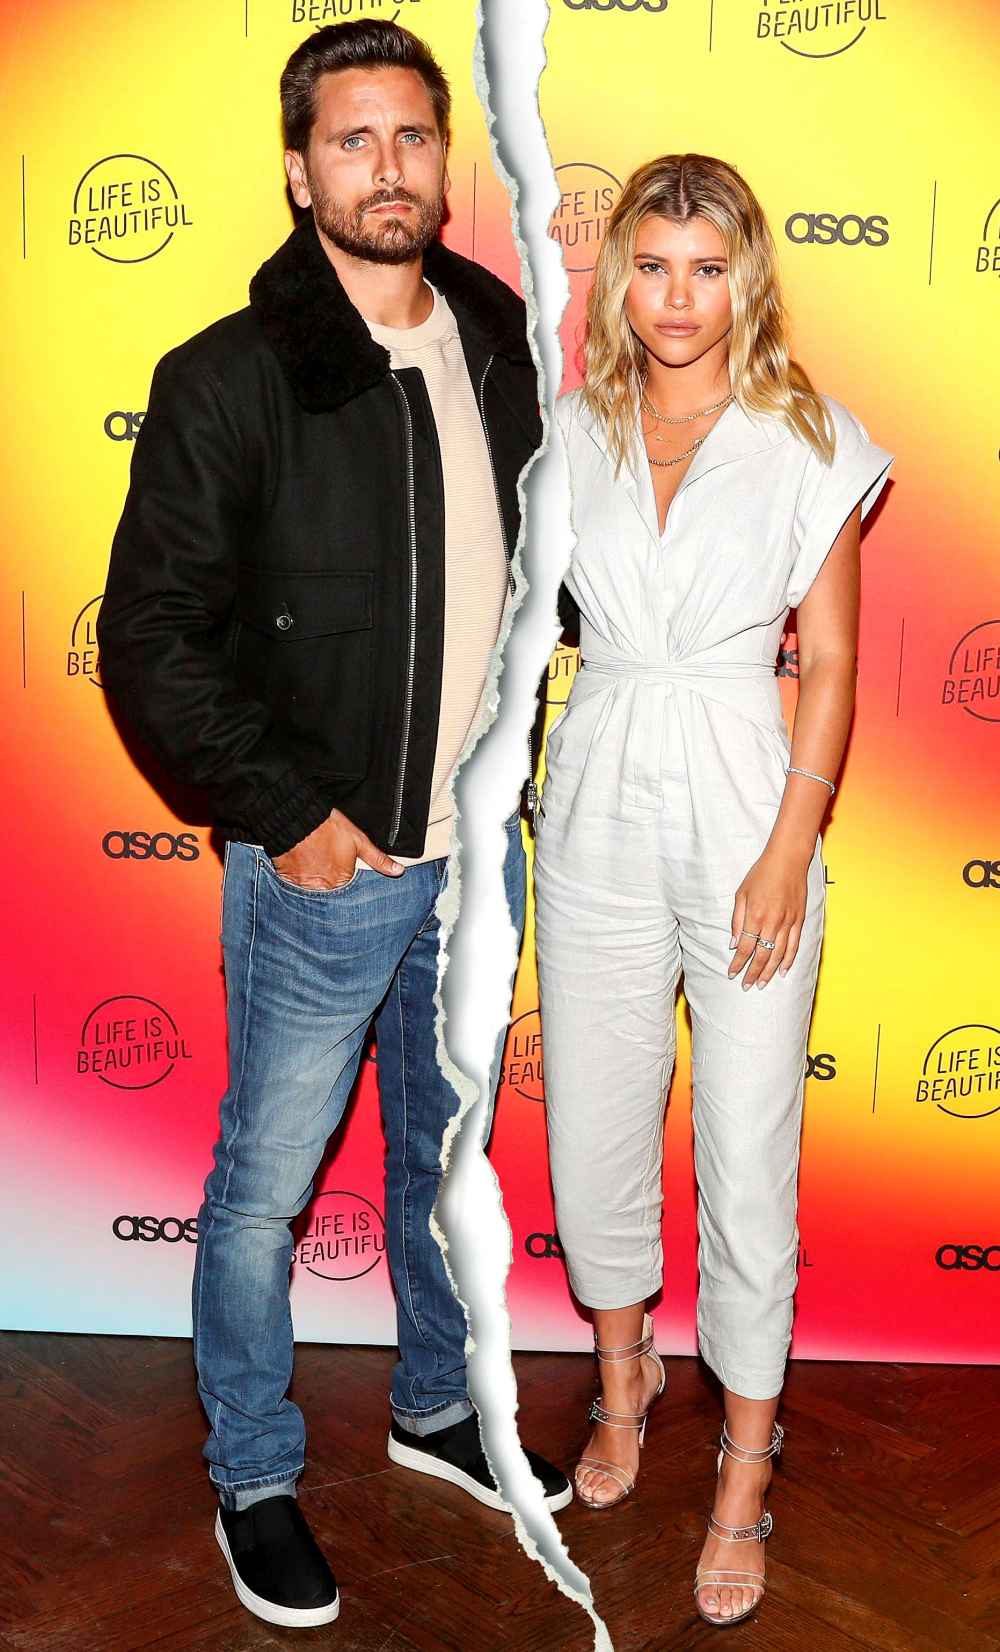 Scott Disick Sofia Richie Call It Quits After 2 Years Together